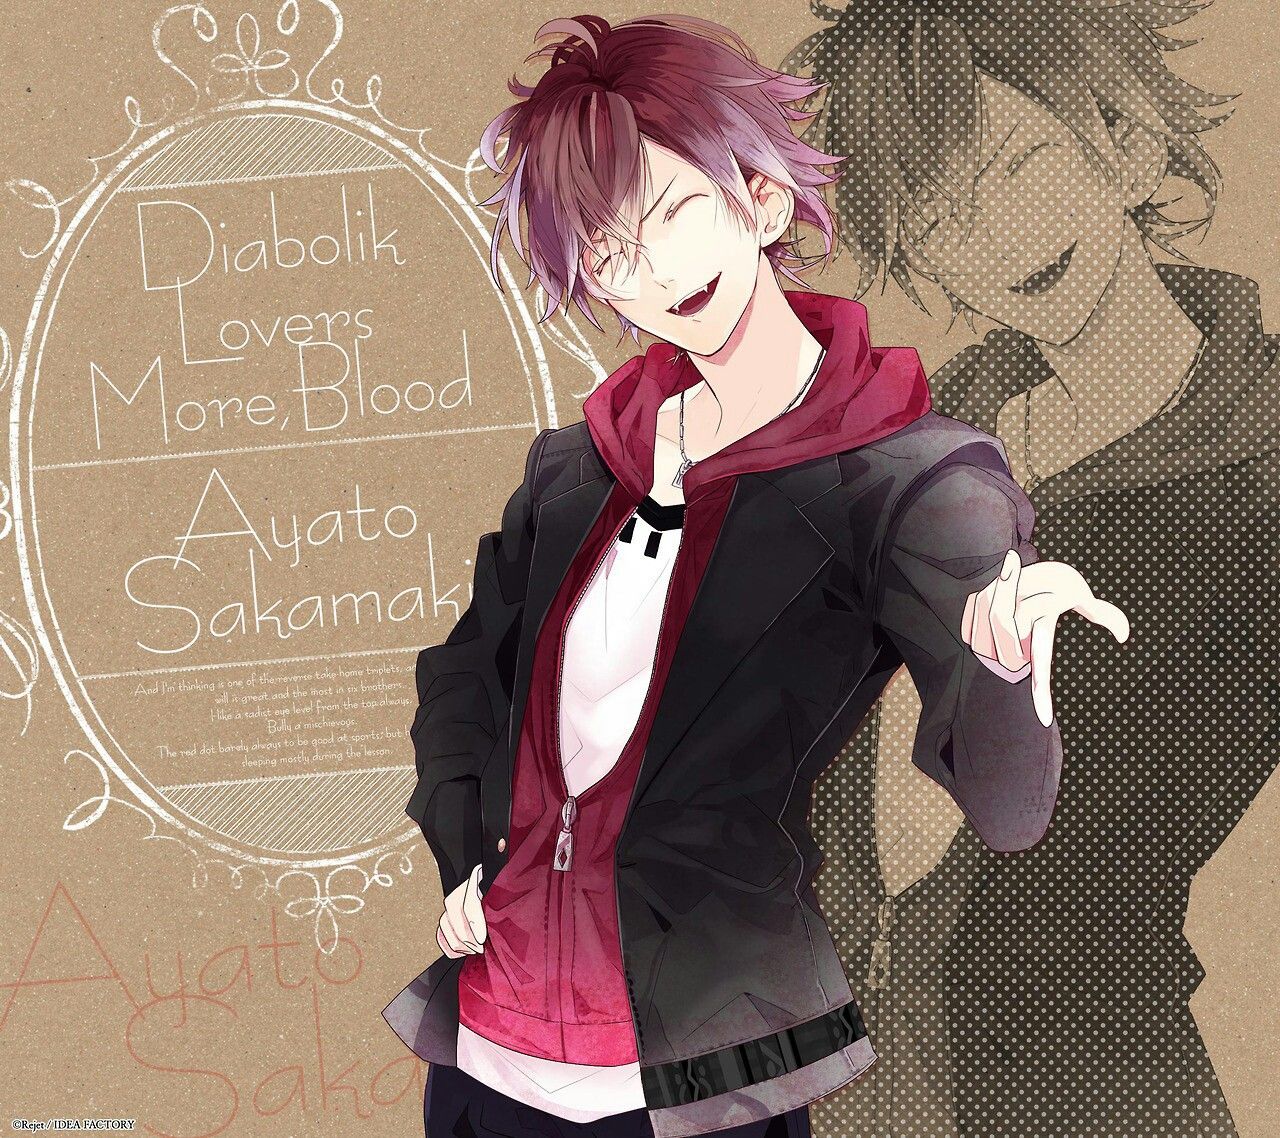 image about BAD v a m p i r e s. See more about diabolik lovers, anime and vampire